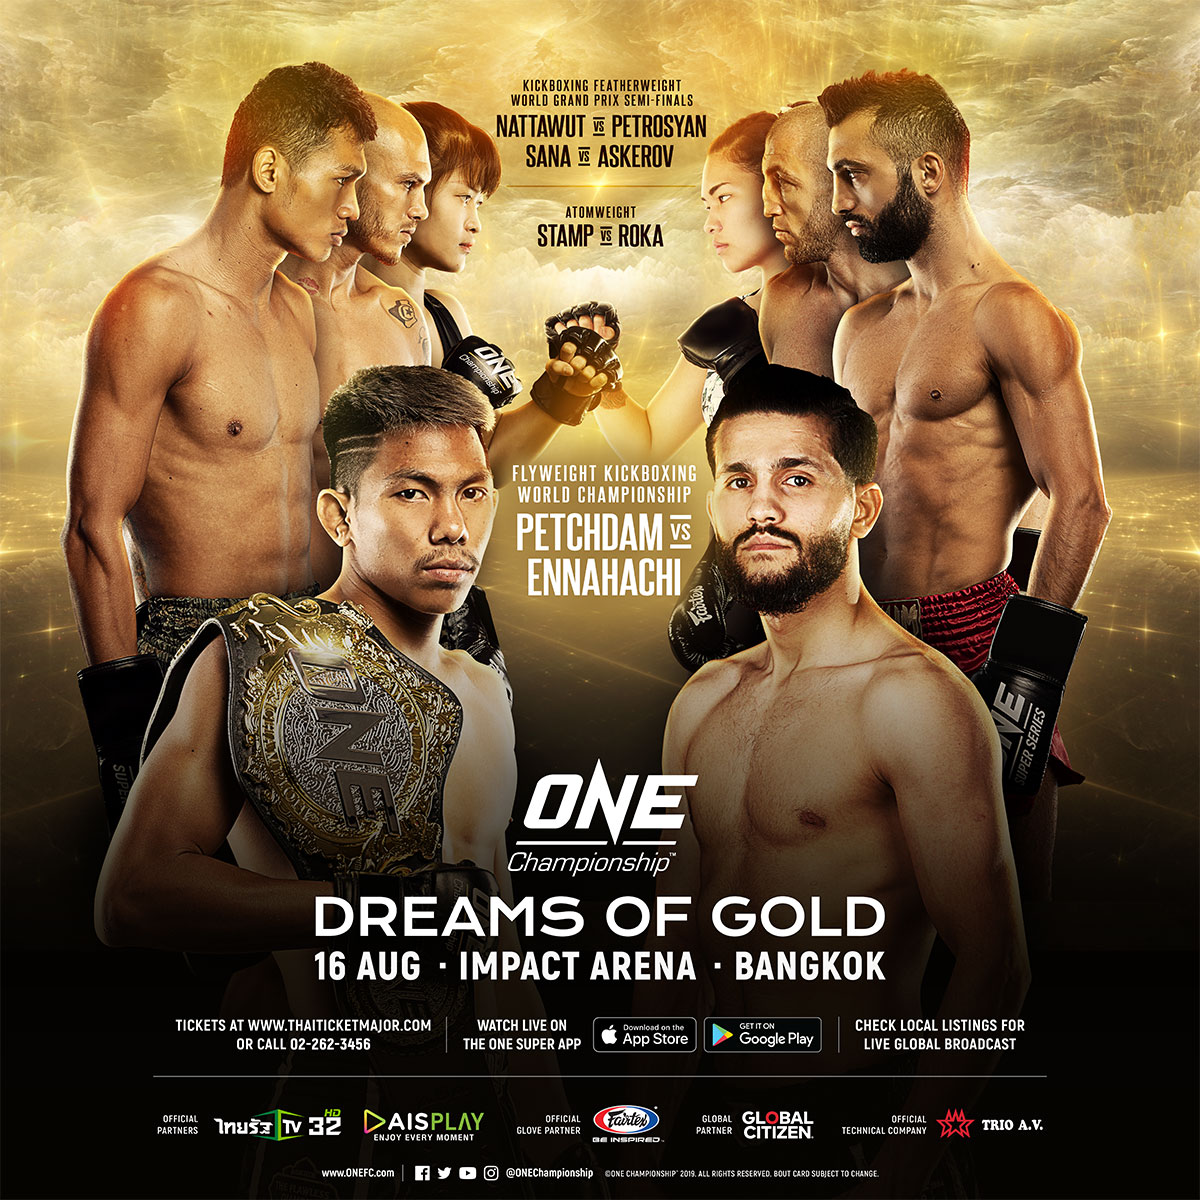 Trực tiếp ONE Championship, trực tiếp ONE, ONE Championship, ONE, link xem ONE Championship, ONE: DREAM OF GOLD, Thanh Le, MMA, Kickboxing